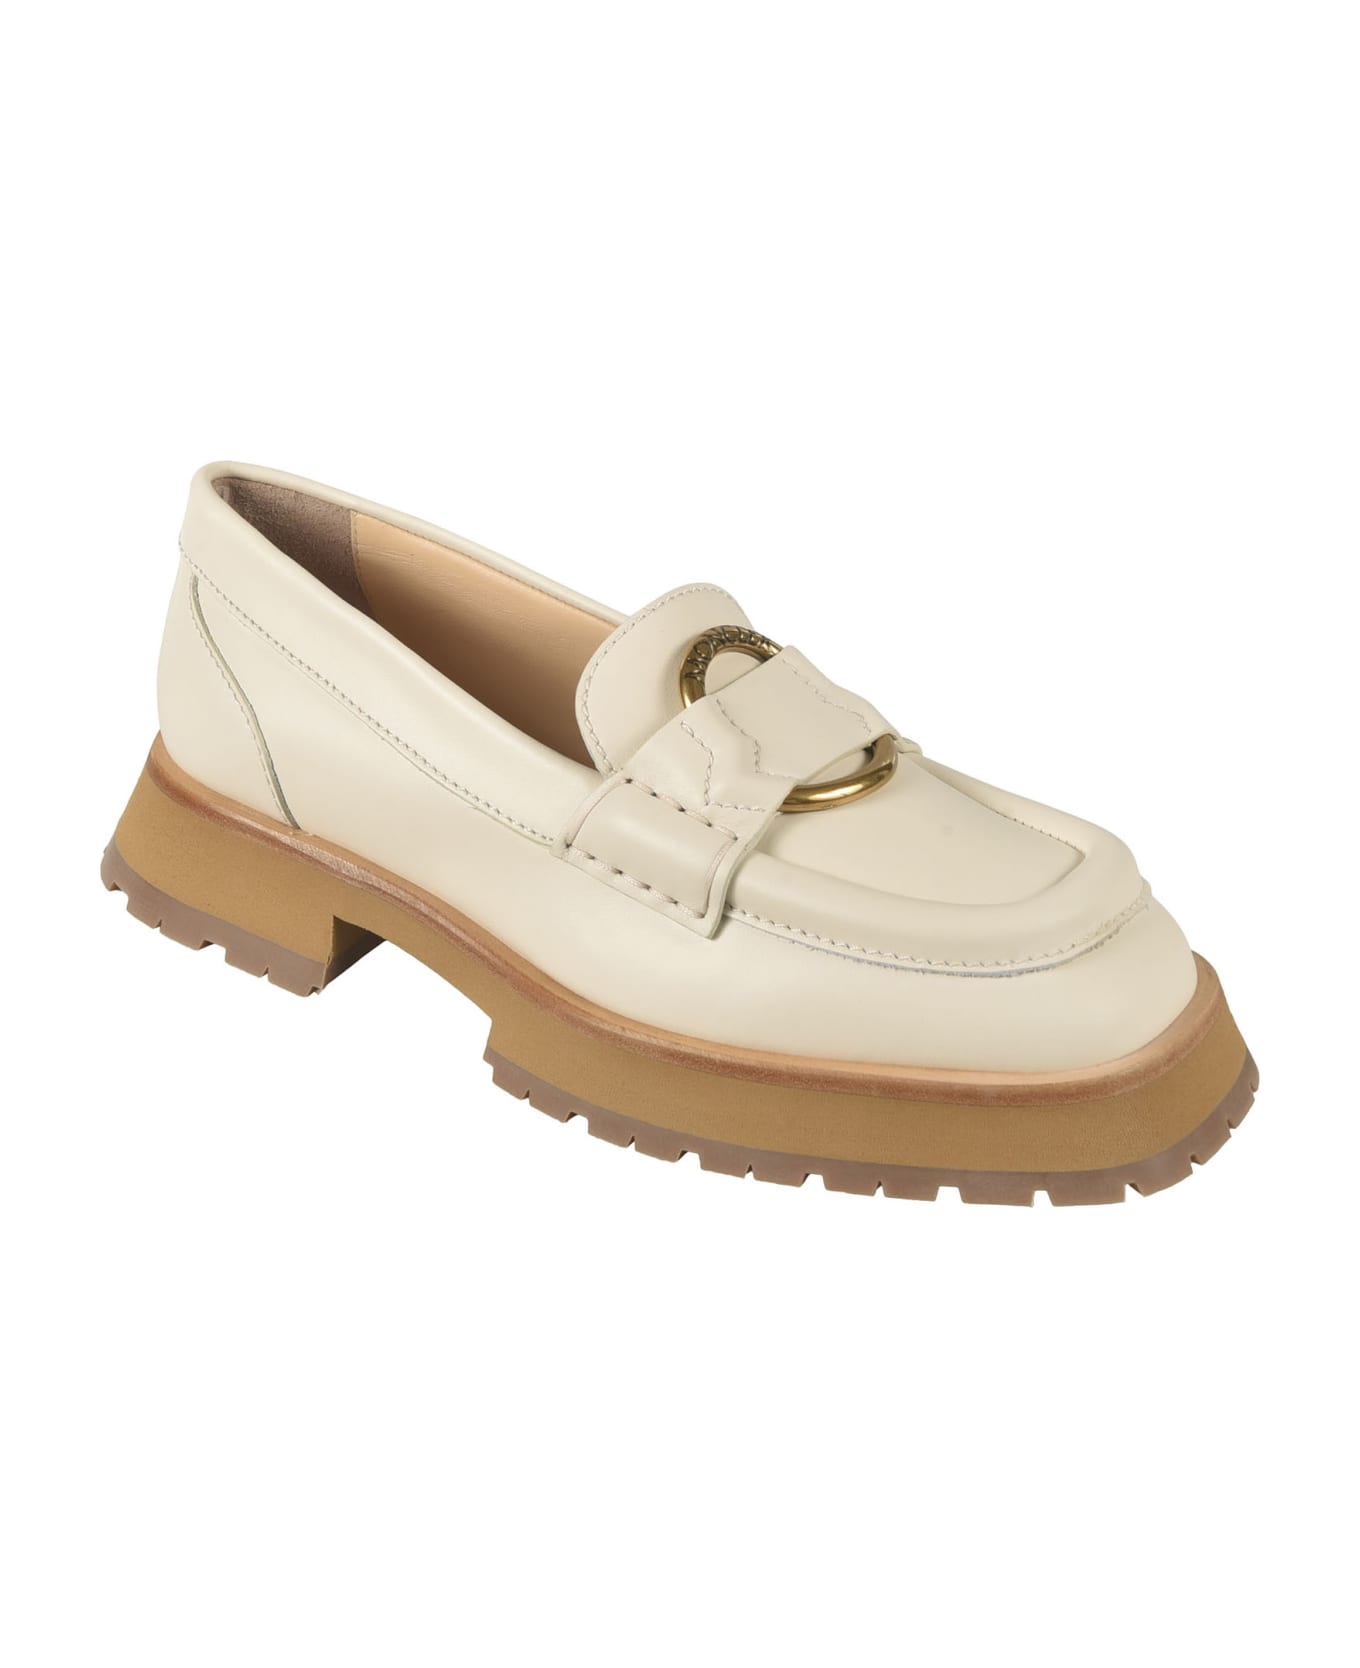 Moncler Bell Loafers - Cream